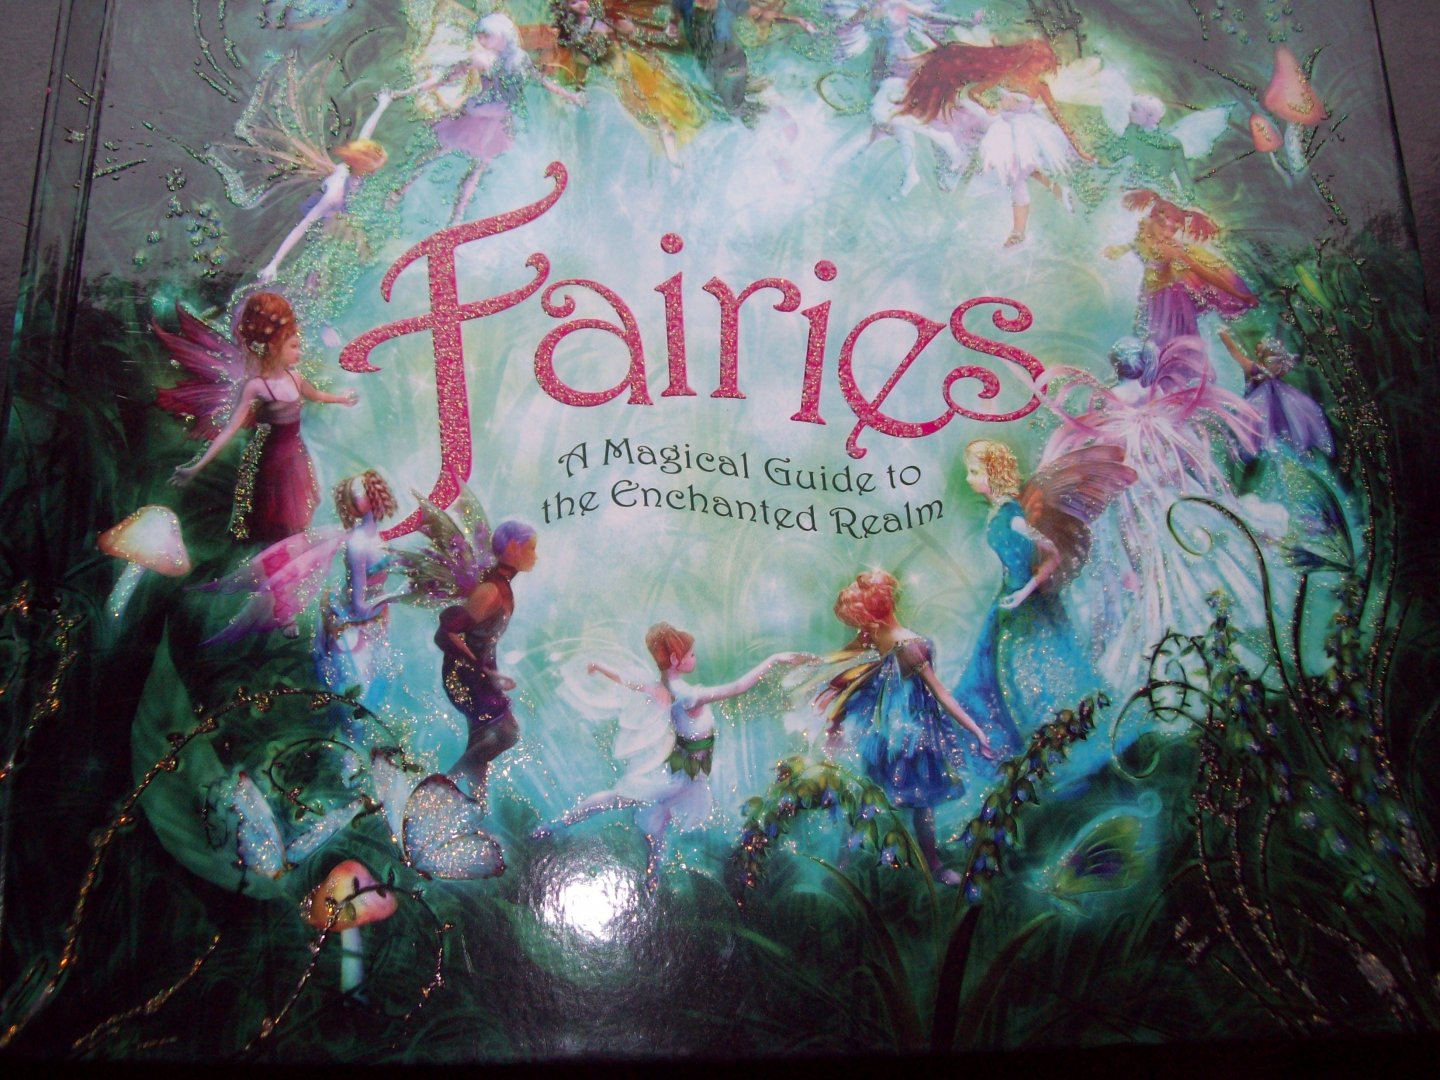 Alison Malony & Patricia Moffett - "Fairies " A Magical Guide to the Enchanted Realm